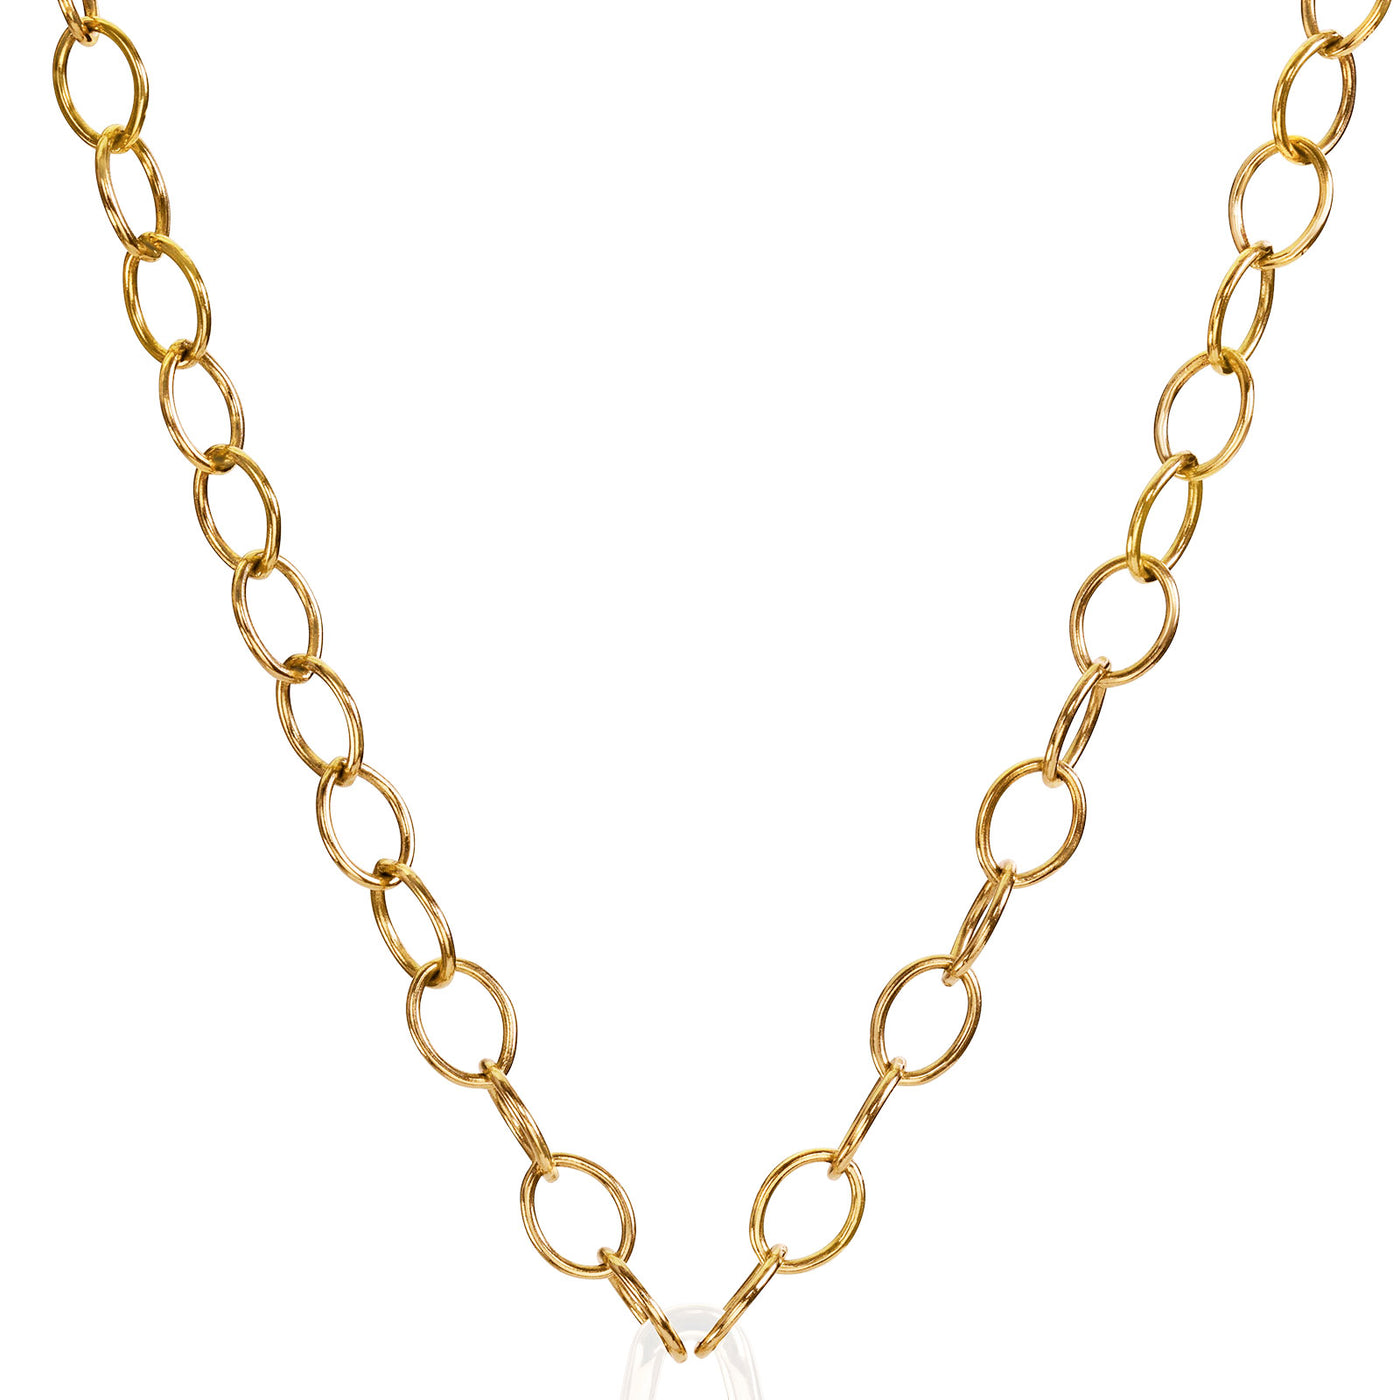 6.3mm Solid 14k Gold Hinge Chain